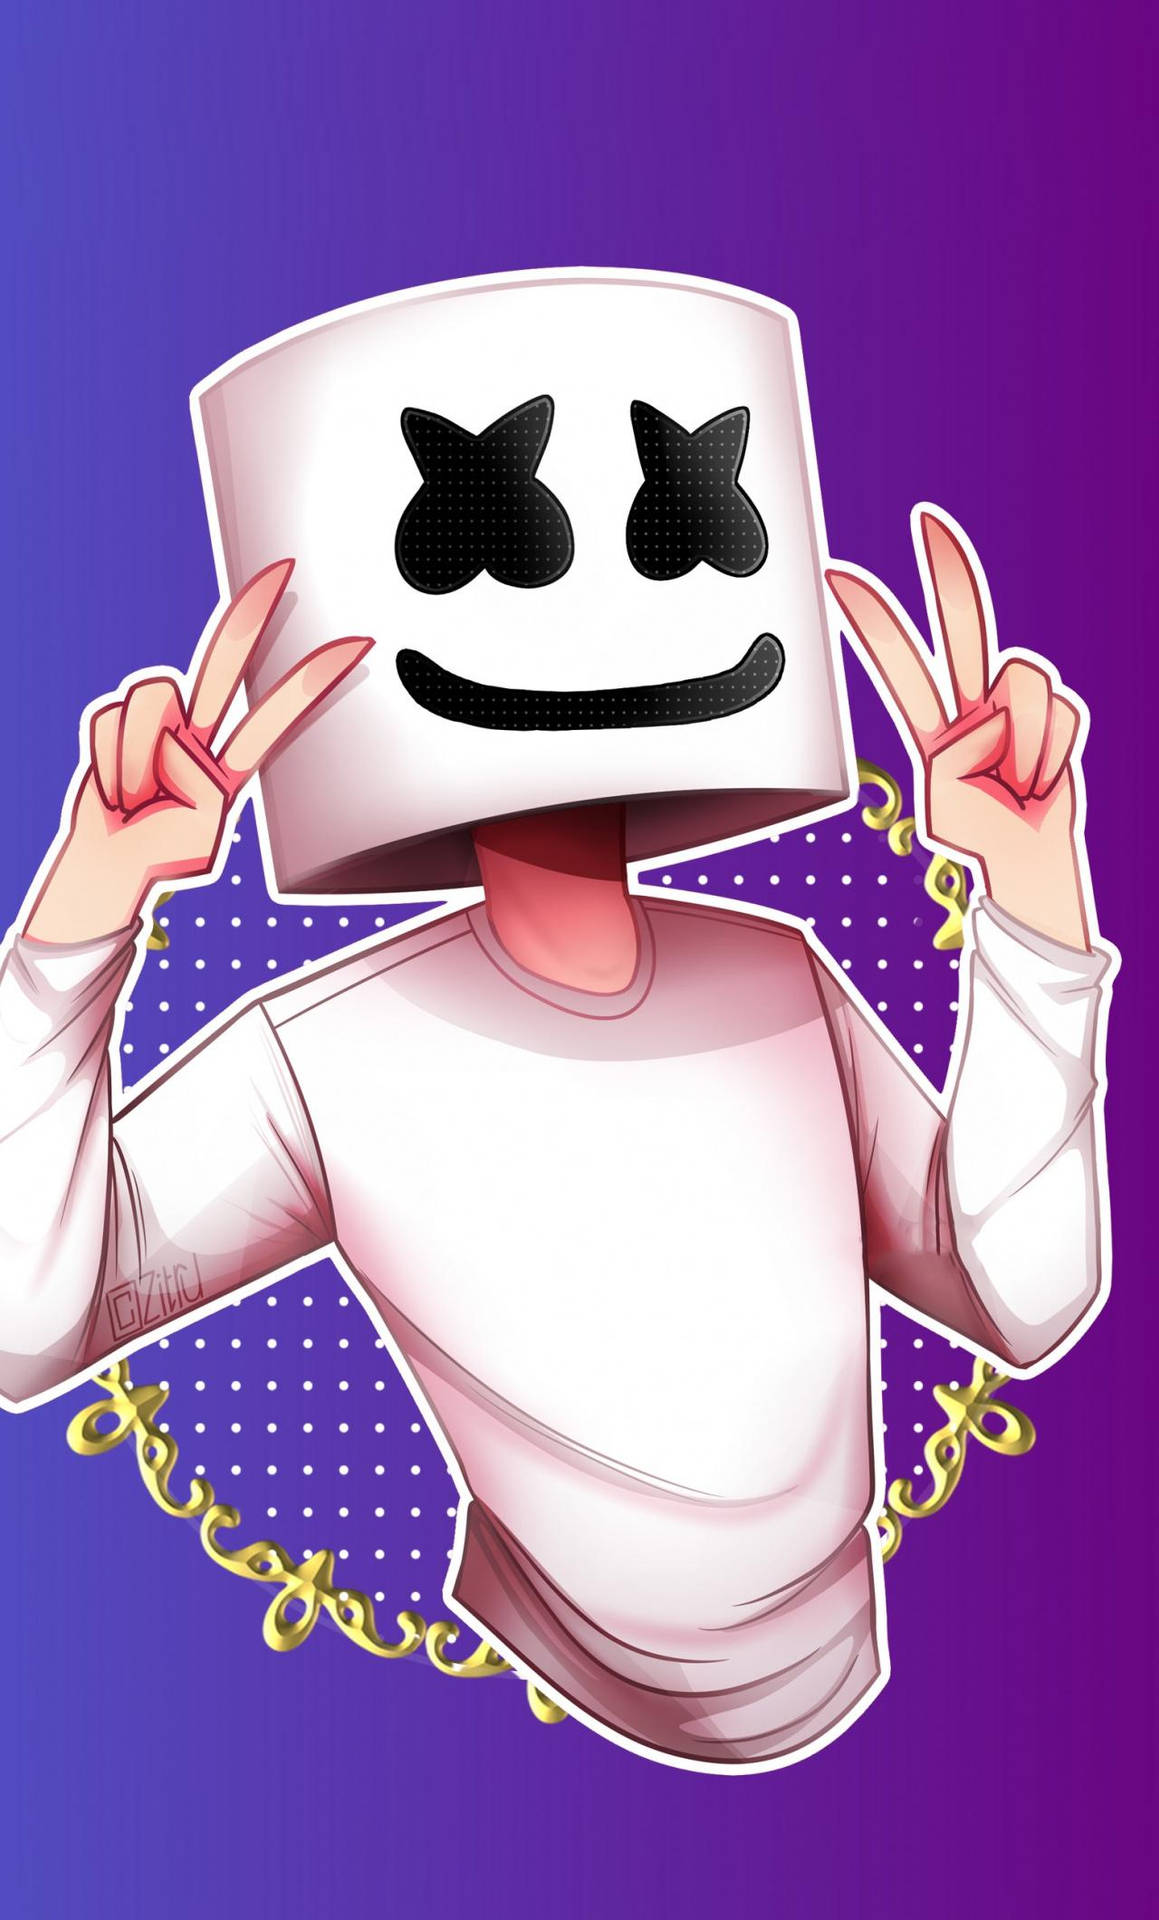 Exciting Marshmello Themed Iphone Wallpaper